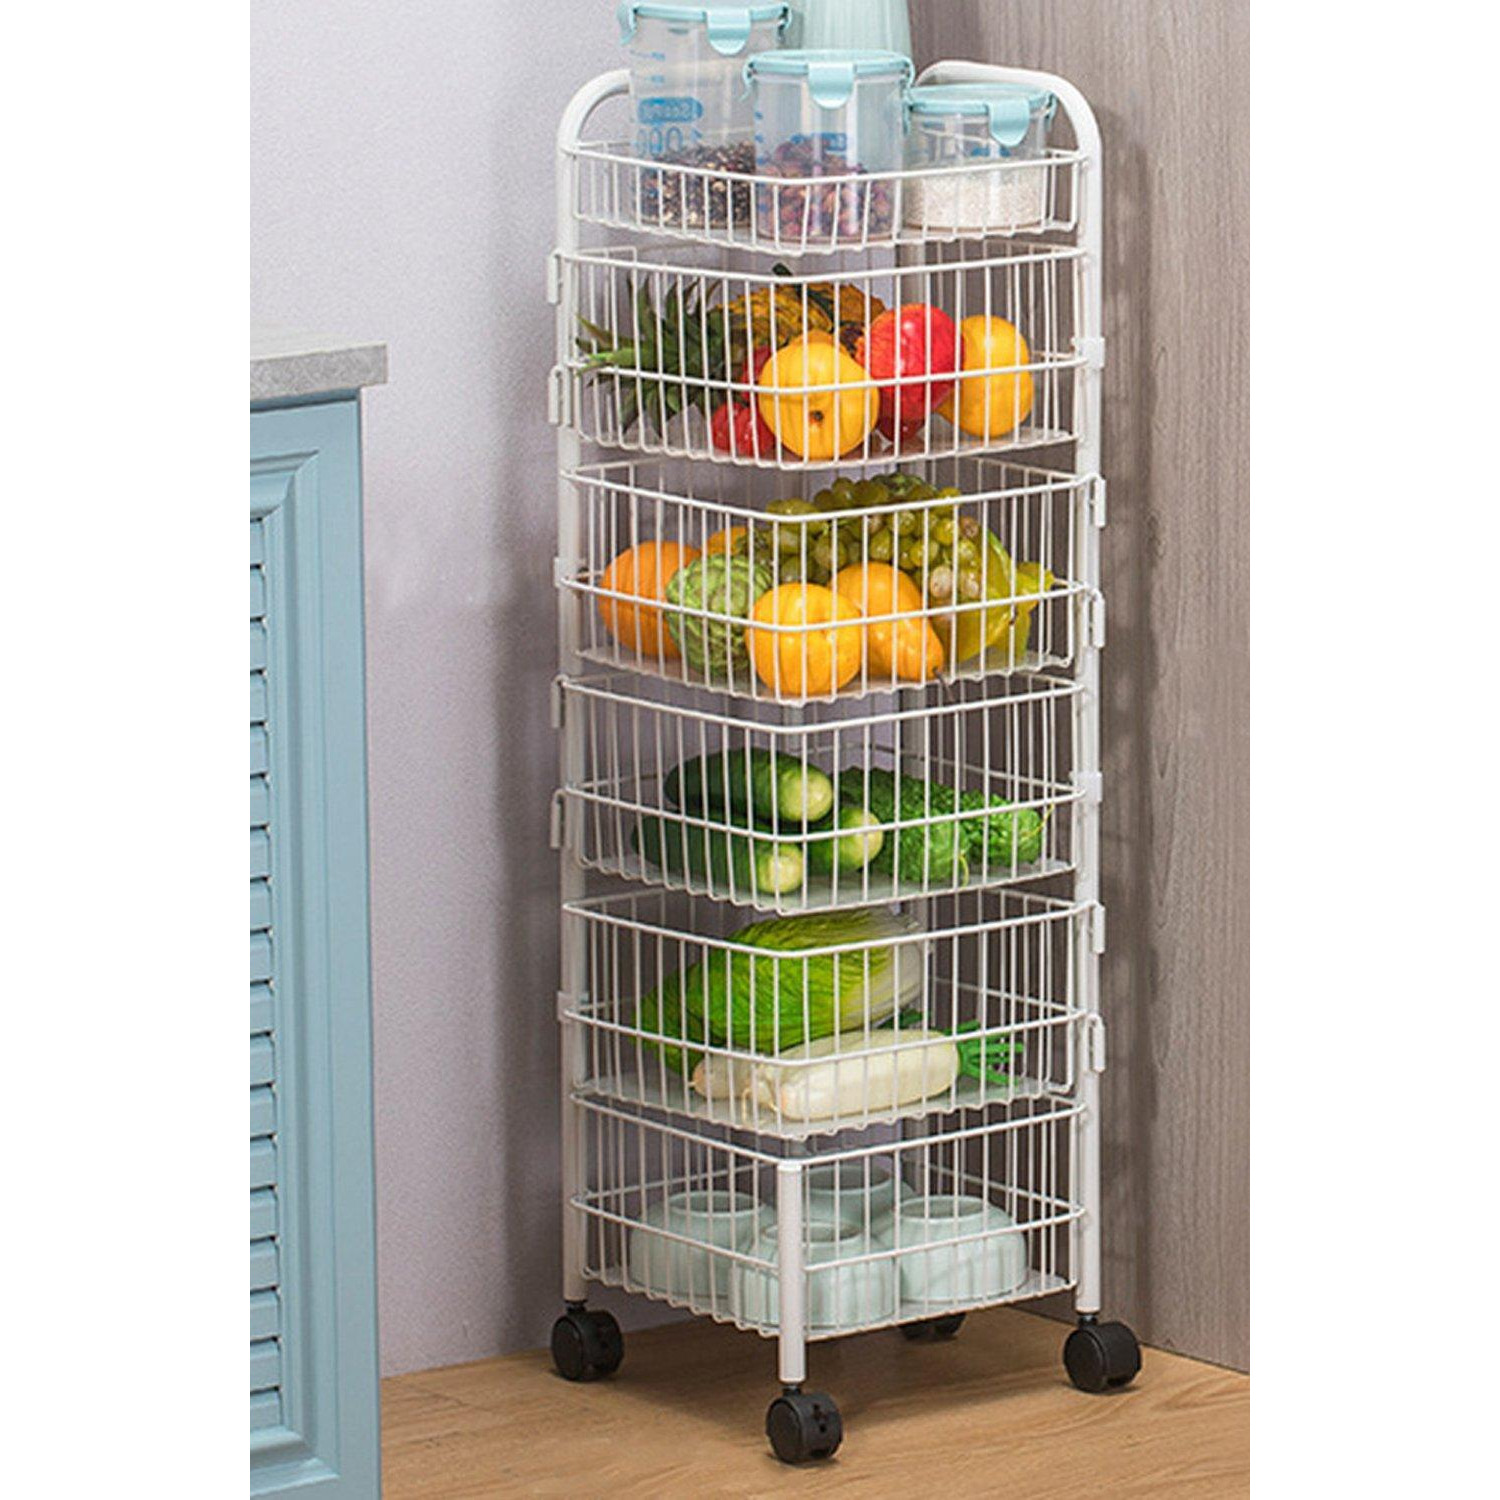 4-Layer Detachable Rotating Trolley Cart Scalable Spice Rack Vegetable Fruit Storage Basket Organizer for Kitchen - image 1